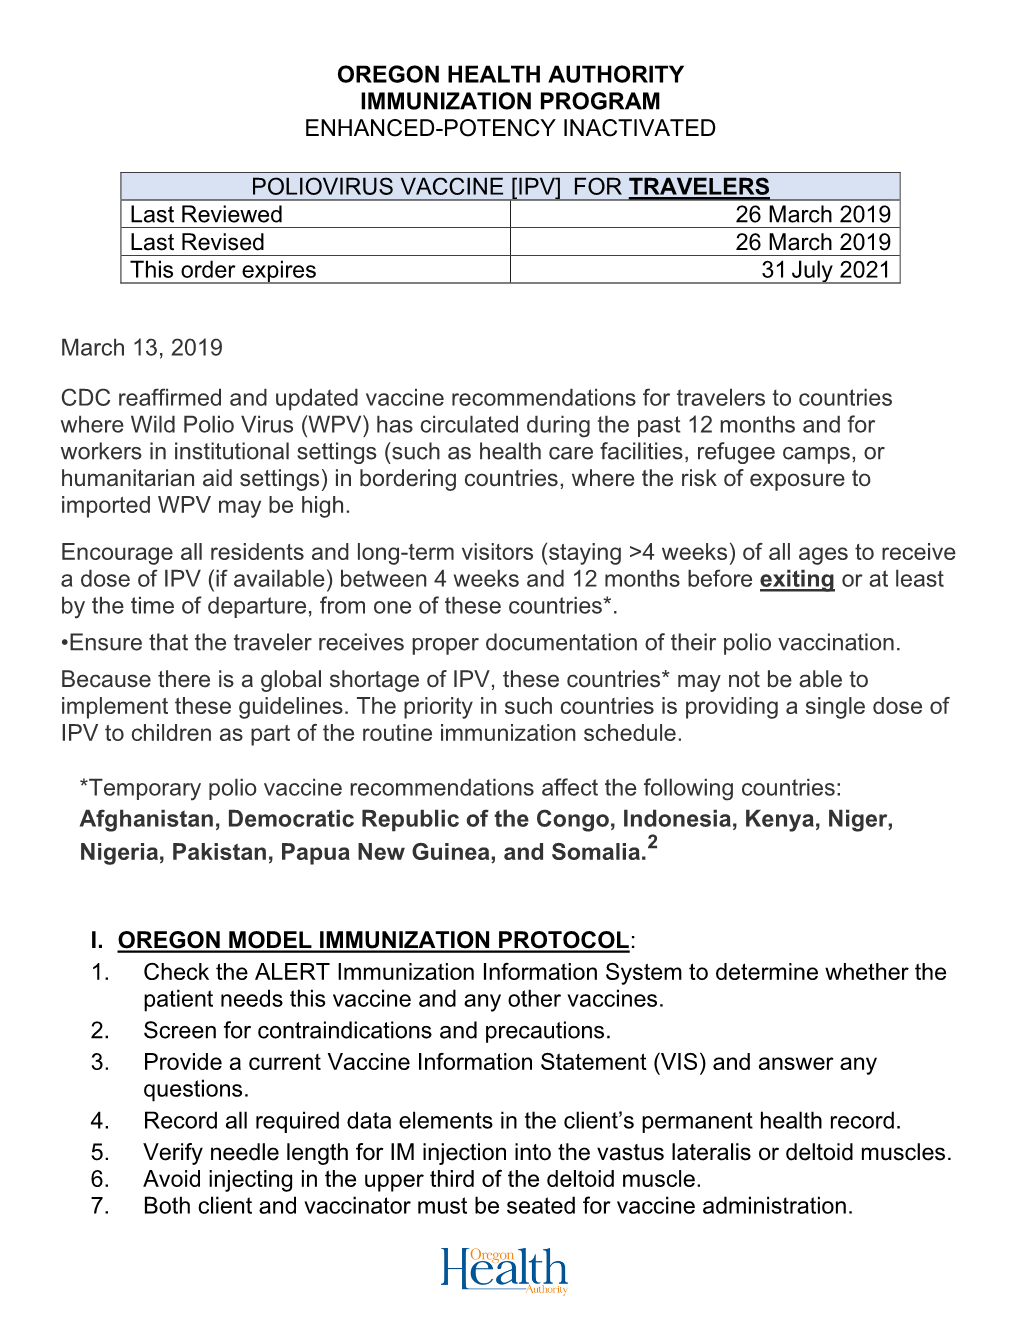 POLIOVIRUS VACCINE [IPV] for TRAVELERS Last Reviewed 26 March 2019 Last Revised 26 March 2019 This Order Expires 31 July 2021